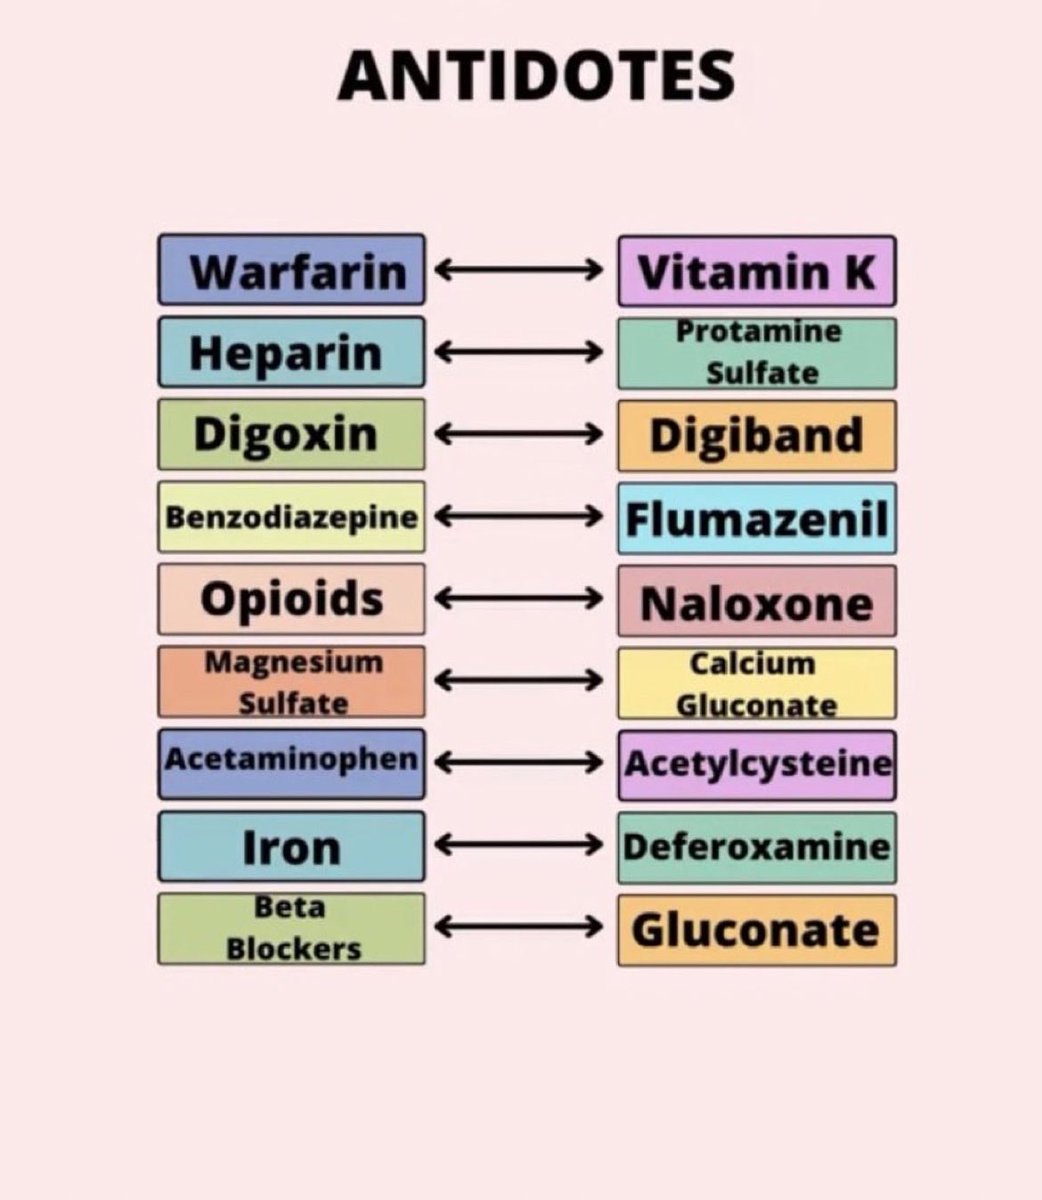 What’s your favorite antidote ? #MedEd #FOAMed